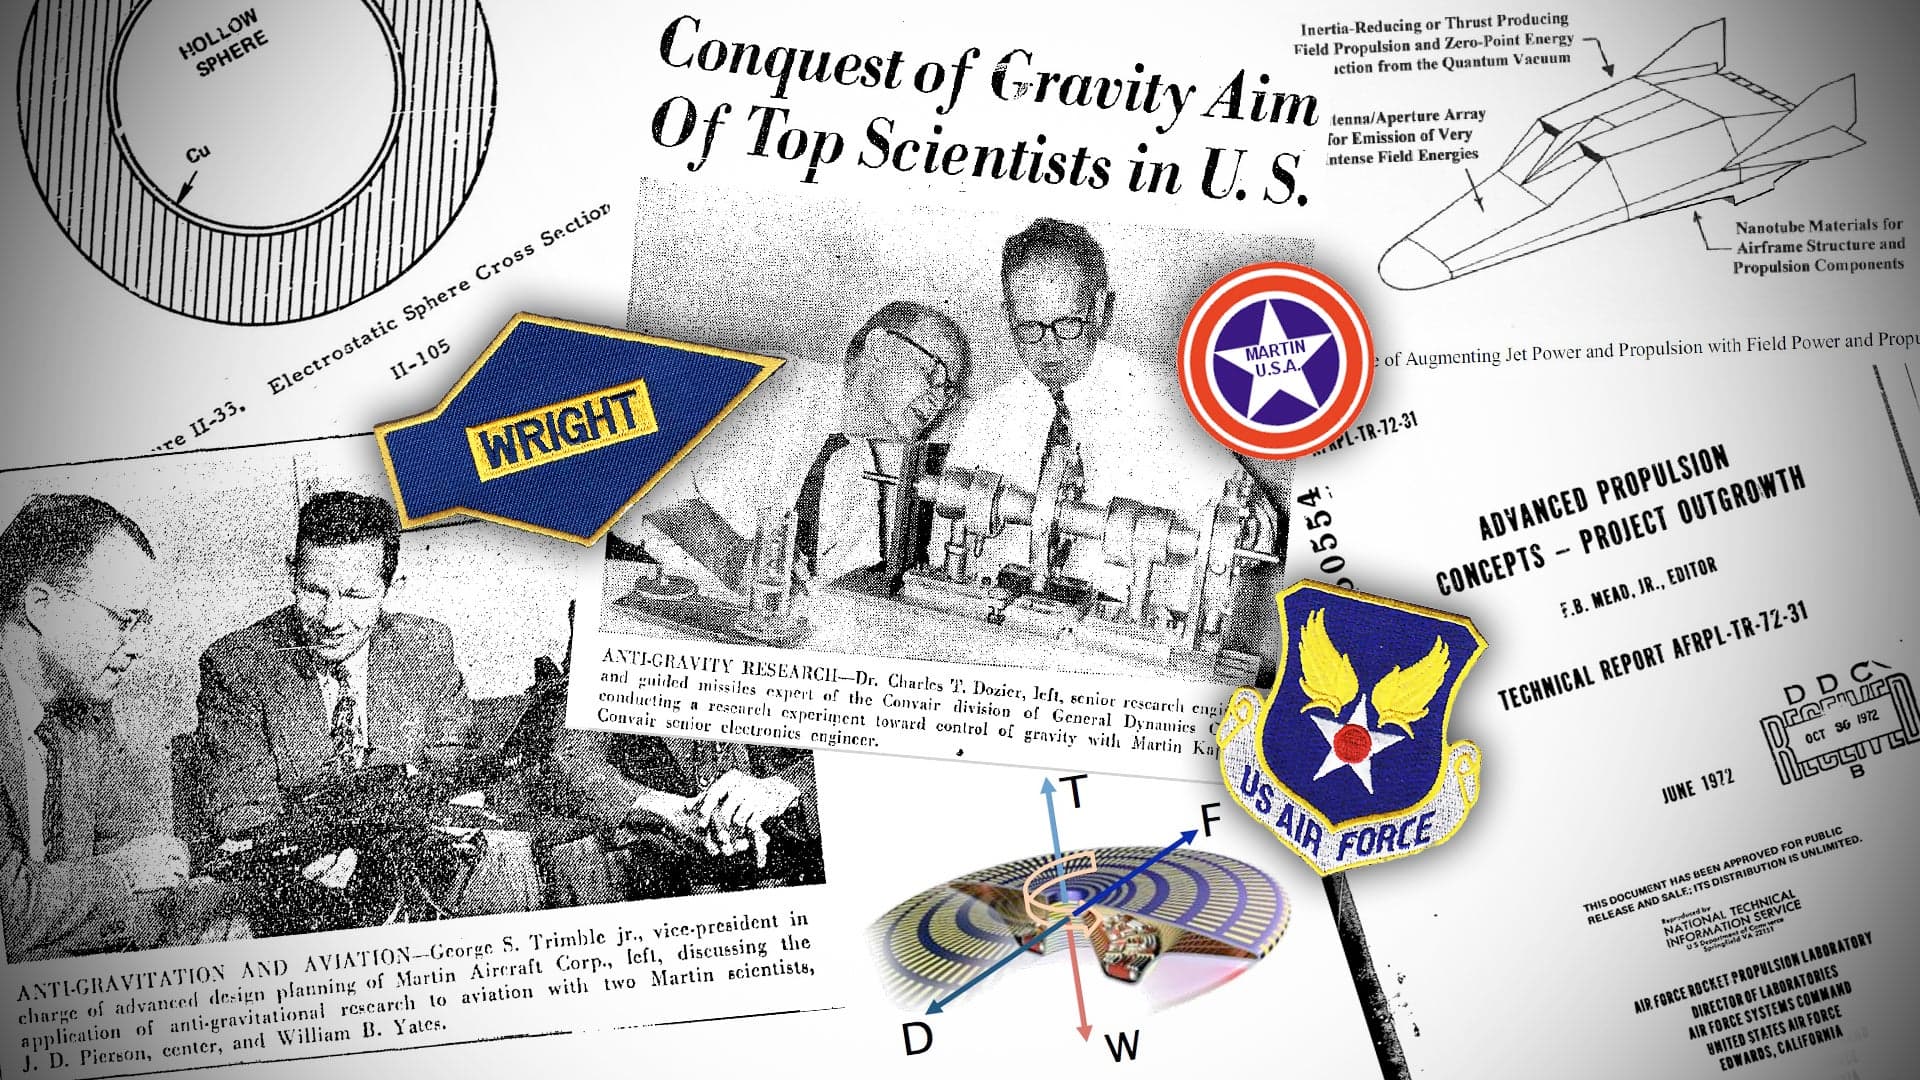 The Truth Is The Military Has Been Researching “Anti-Gravity” For Nearly 70 Years